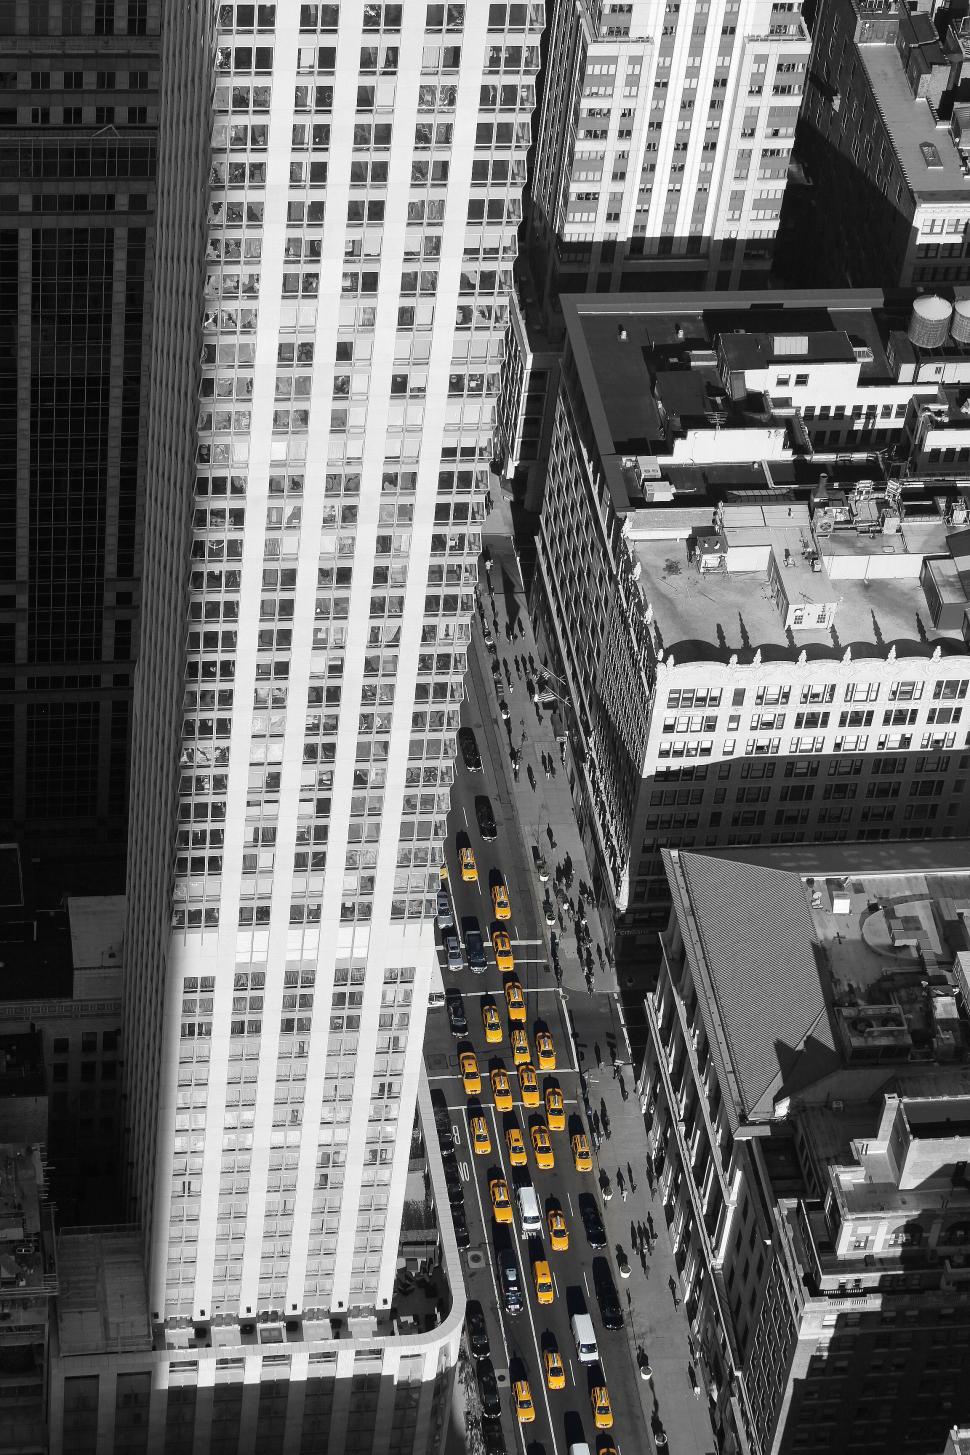 Free Image of Aerial view of yellow taxis on city street 